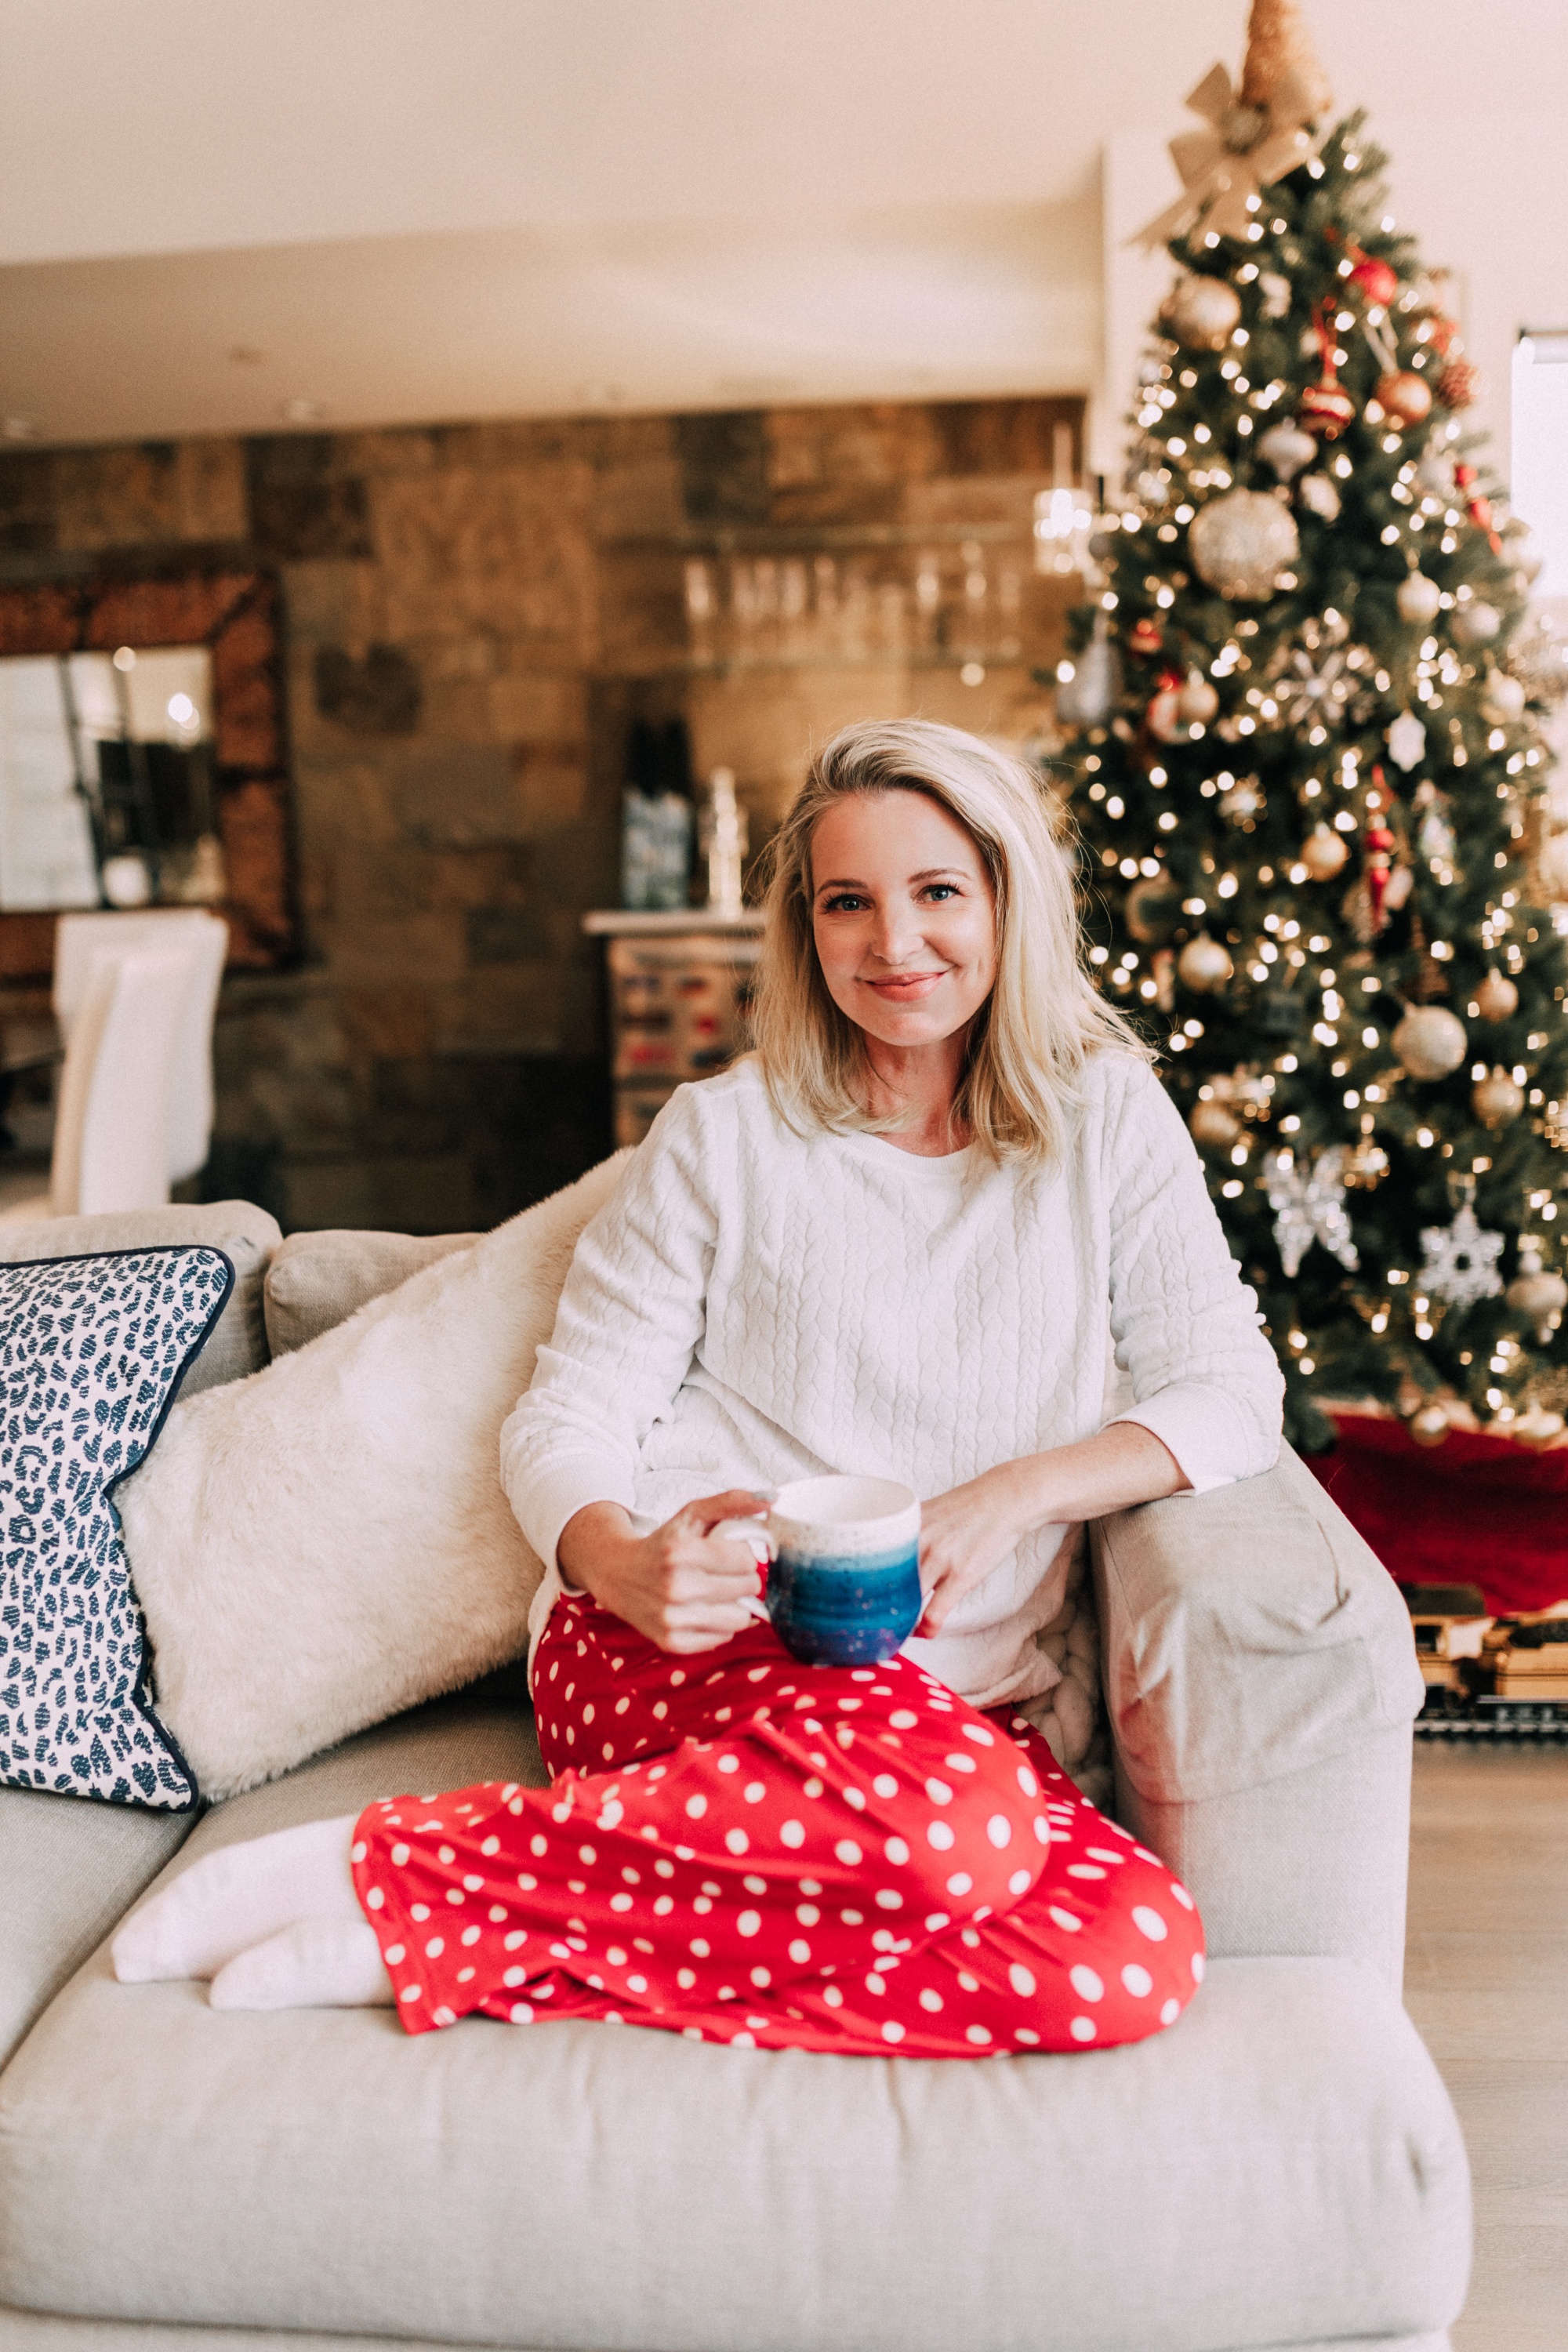 Holiday Traditions, Fashion blogger Erin Busbee of BusbeeStyle.com wearing red fleece polka dot pajama pants with a fleece cable knit pullover from Jockey in Telluride, CO